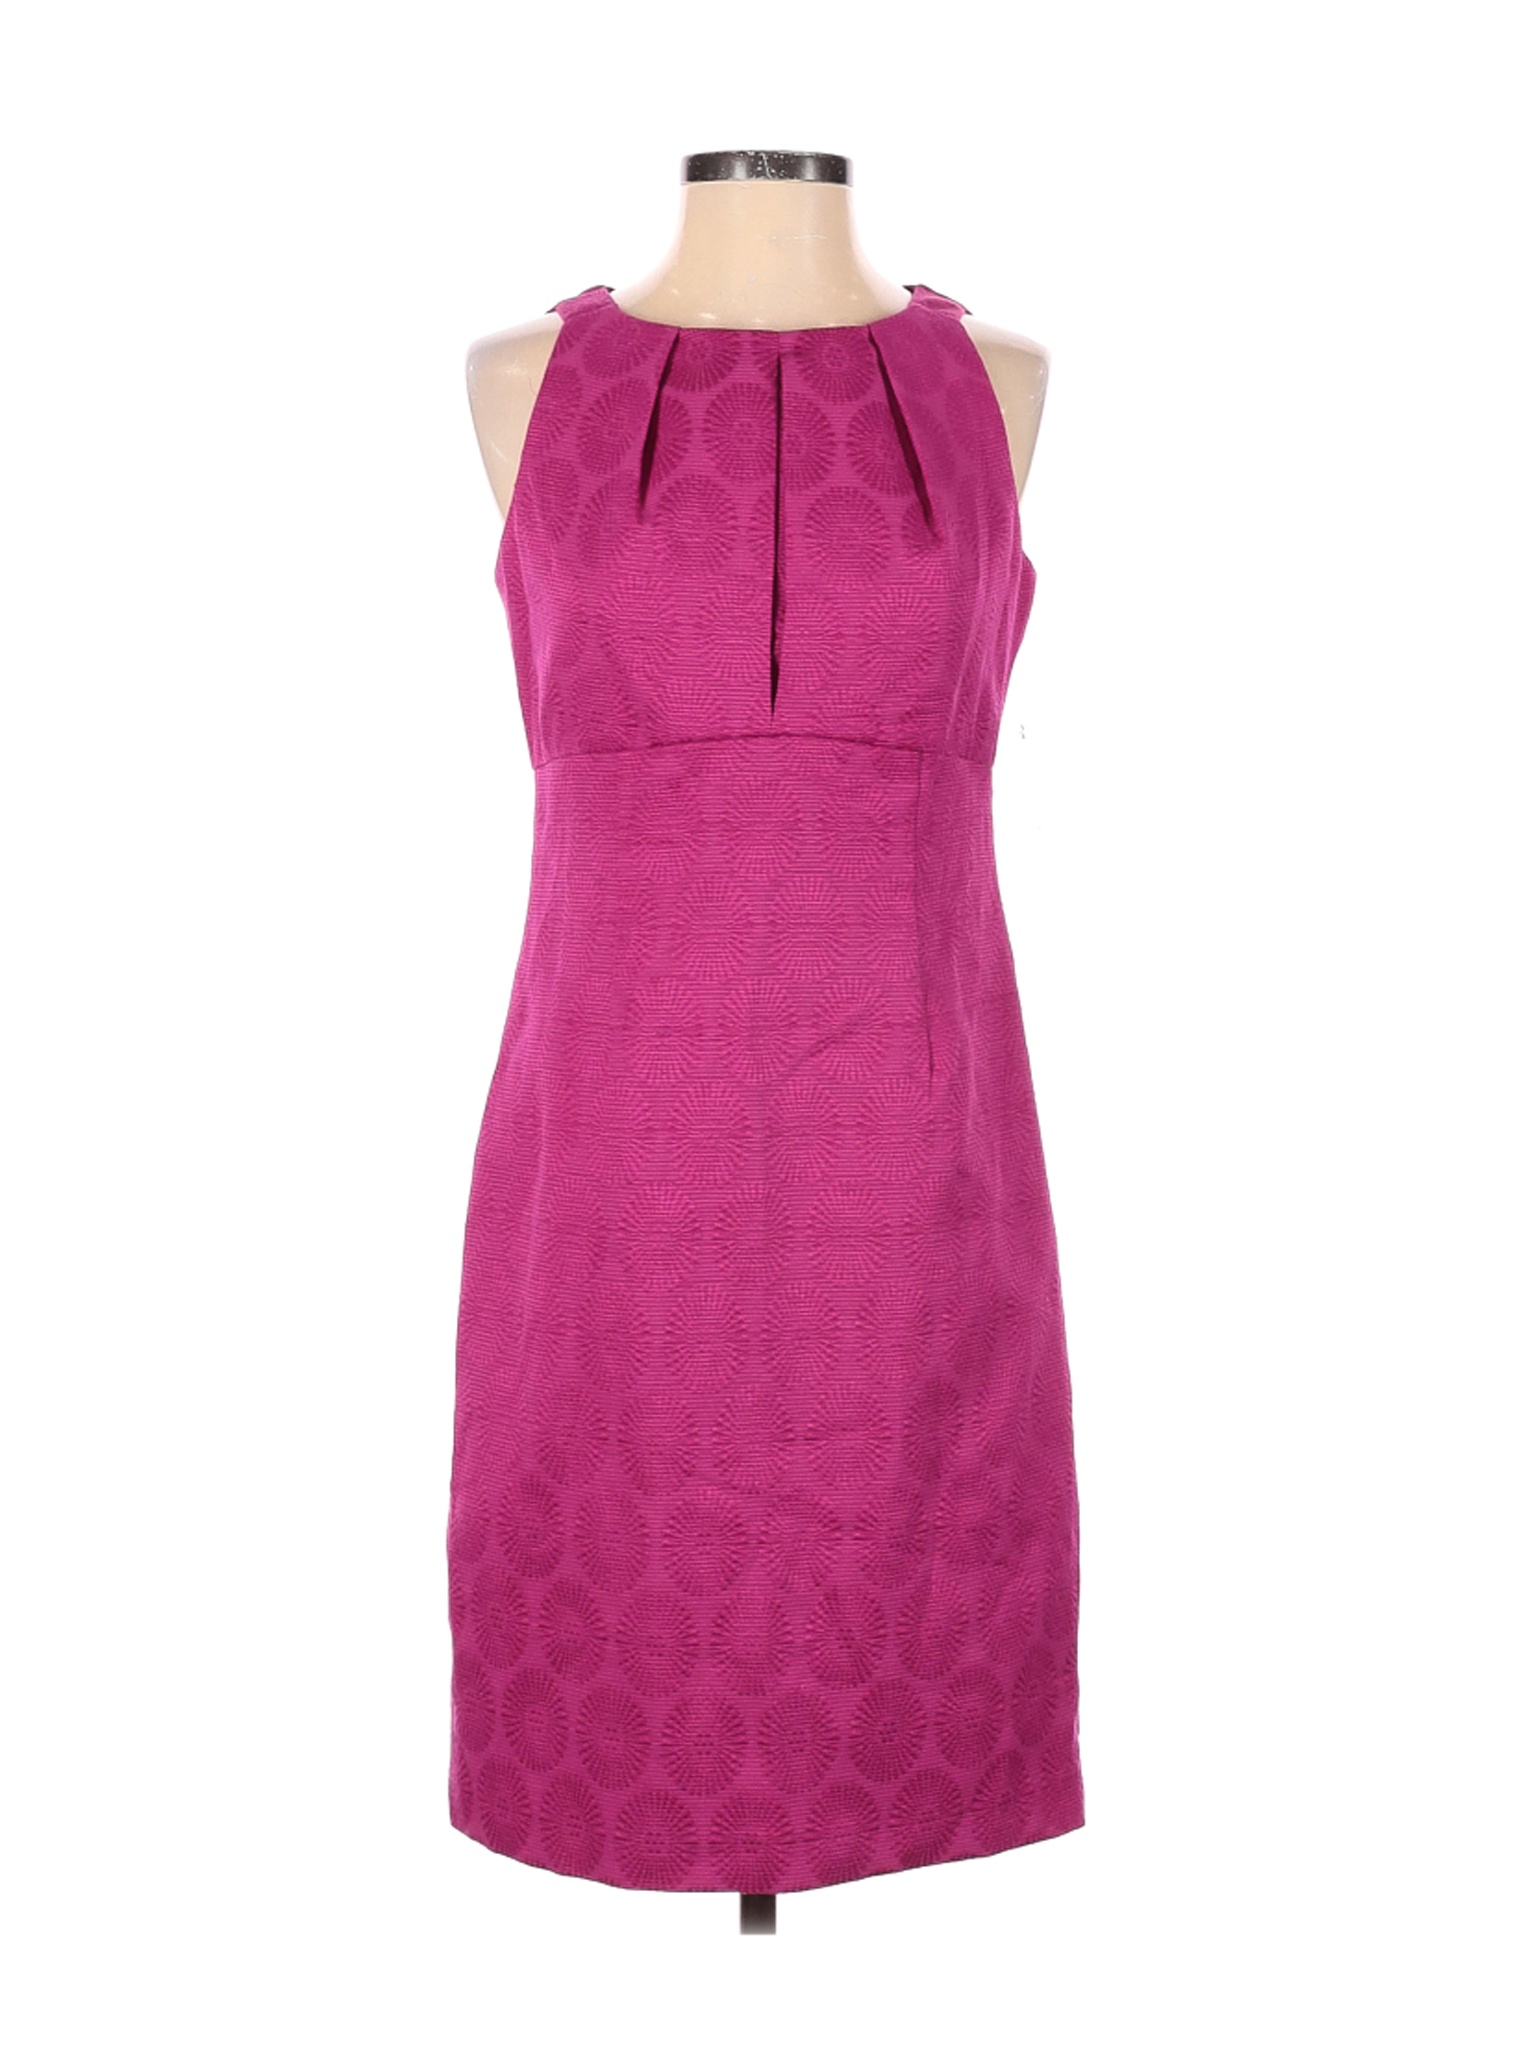 NWT Just... Taylor Women Pink Casual Dress 4 | eBay